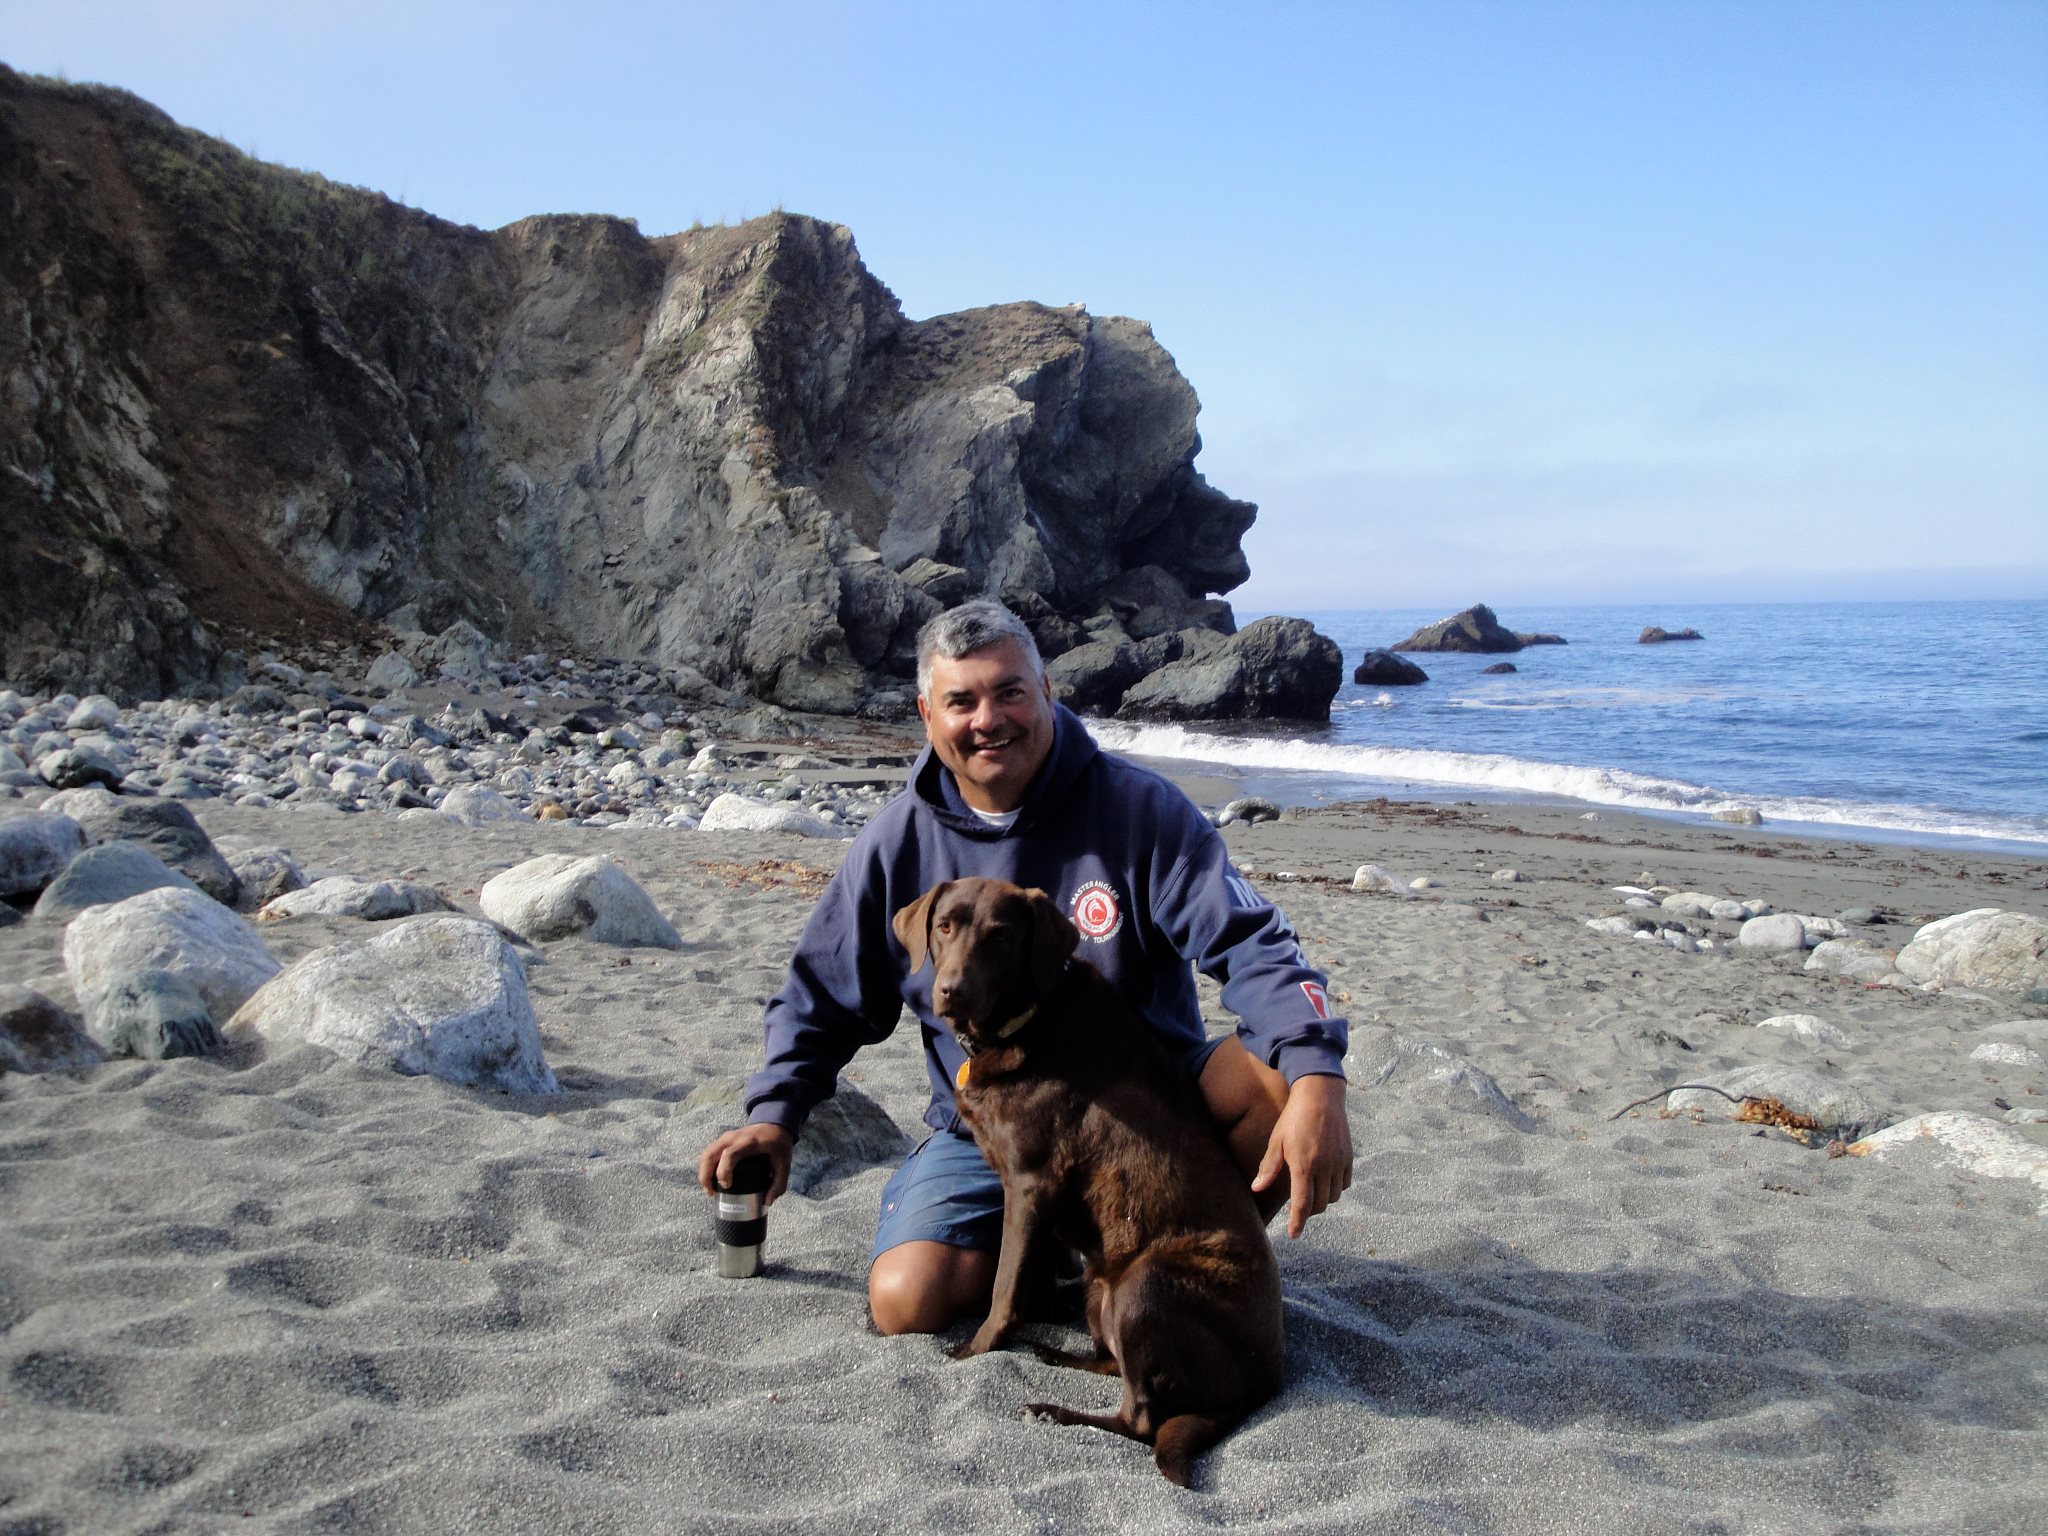 boat captain and fishermen michael arujo. he is on his knees, smiling, as he poses with his large, brown dog on a beach.